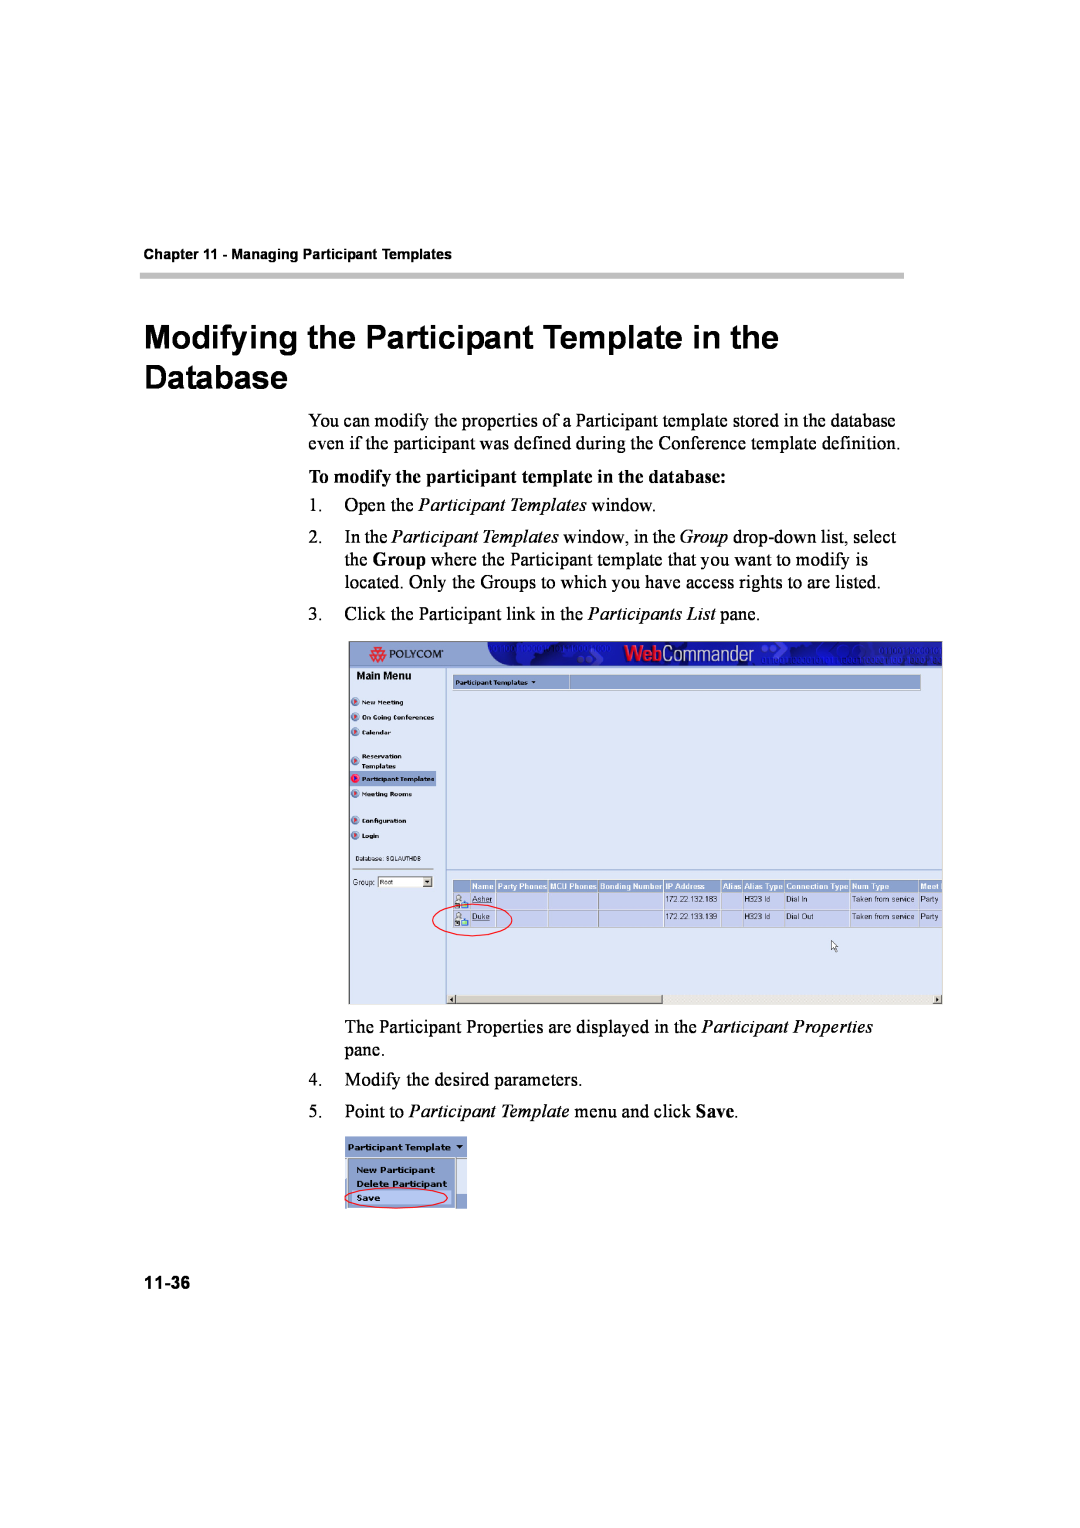 Polycom 8 manual Open the Participant Templates window, Modify the desired parameters 